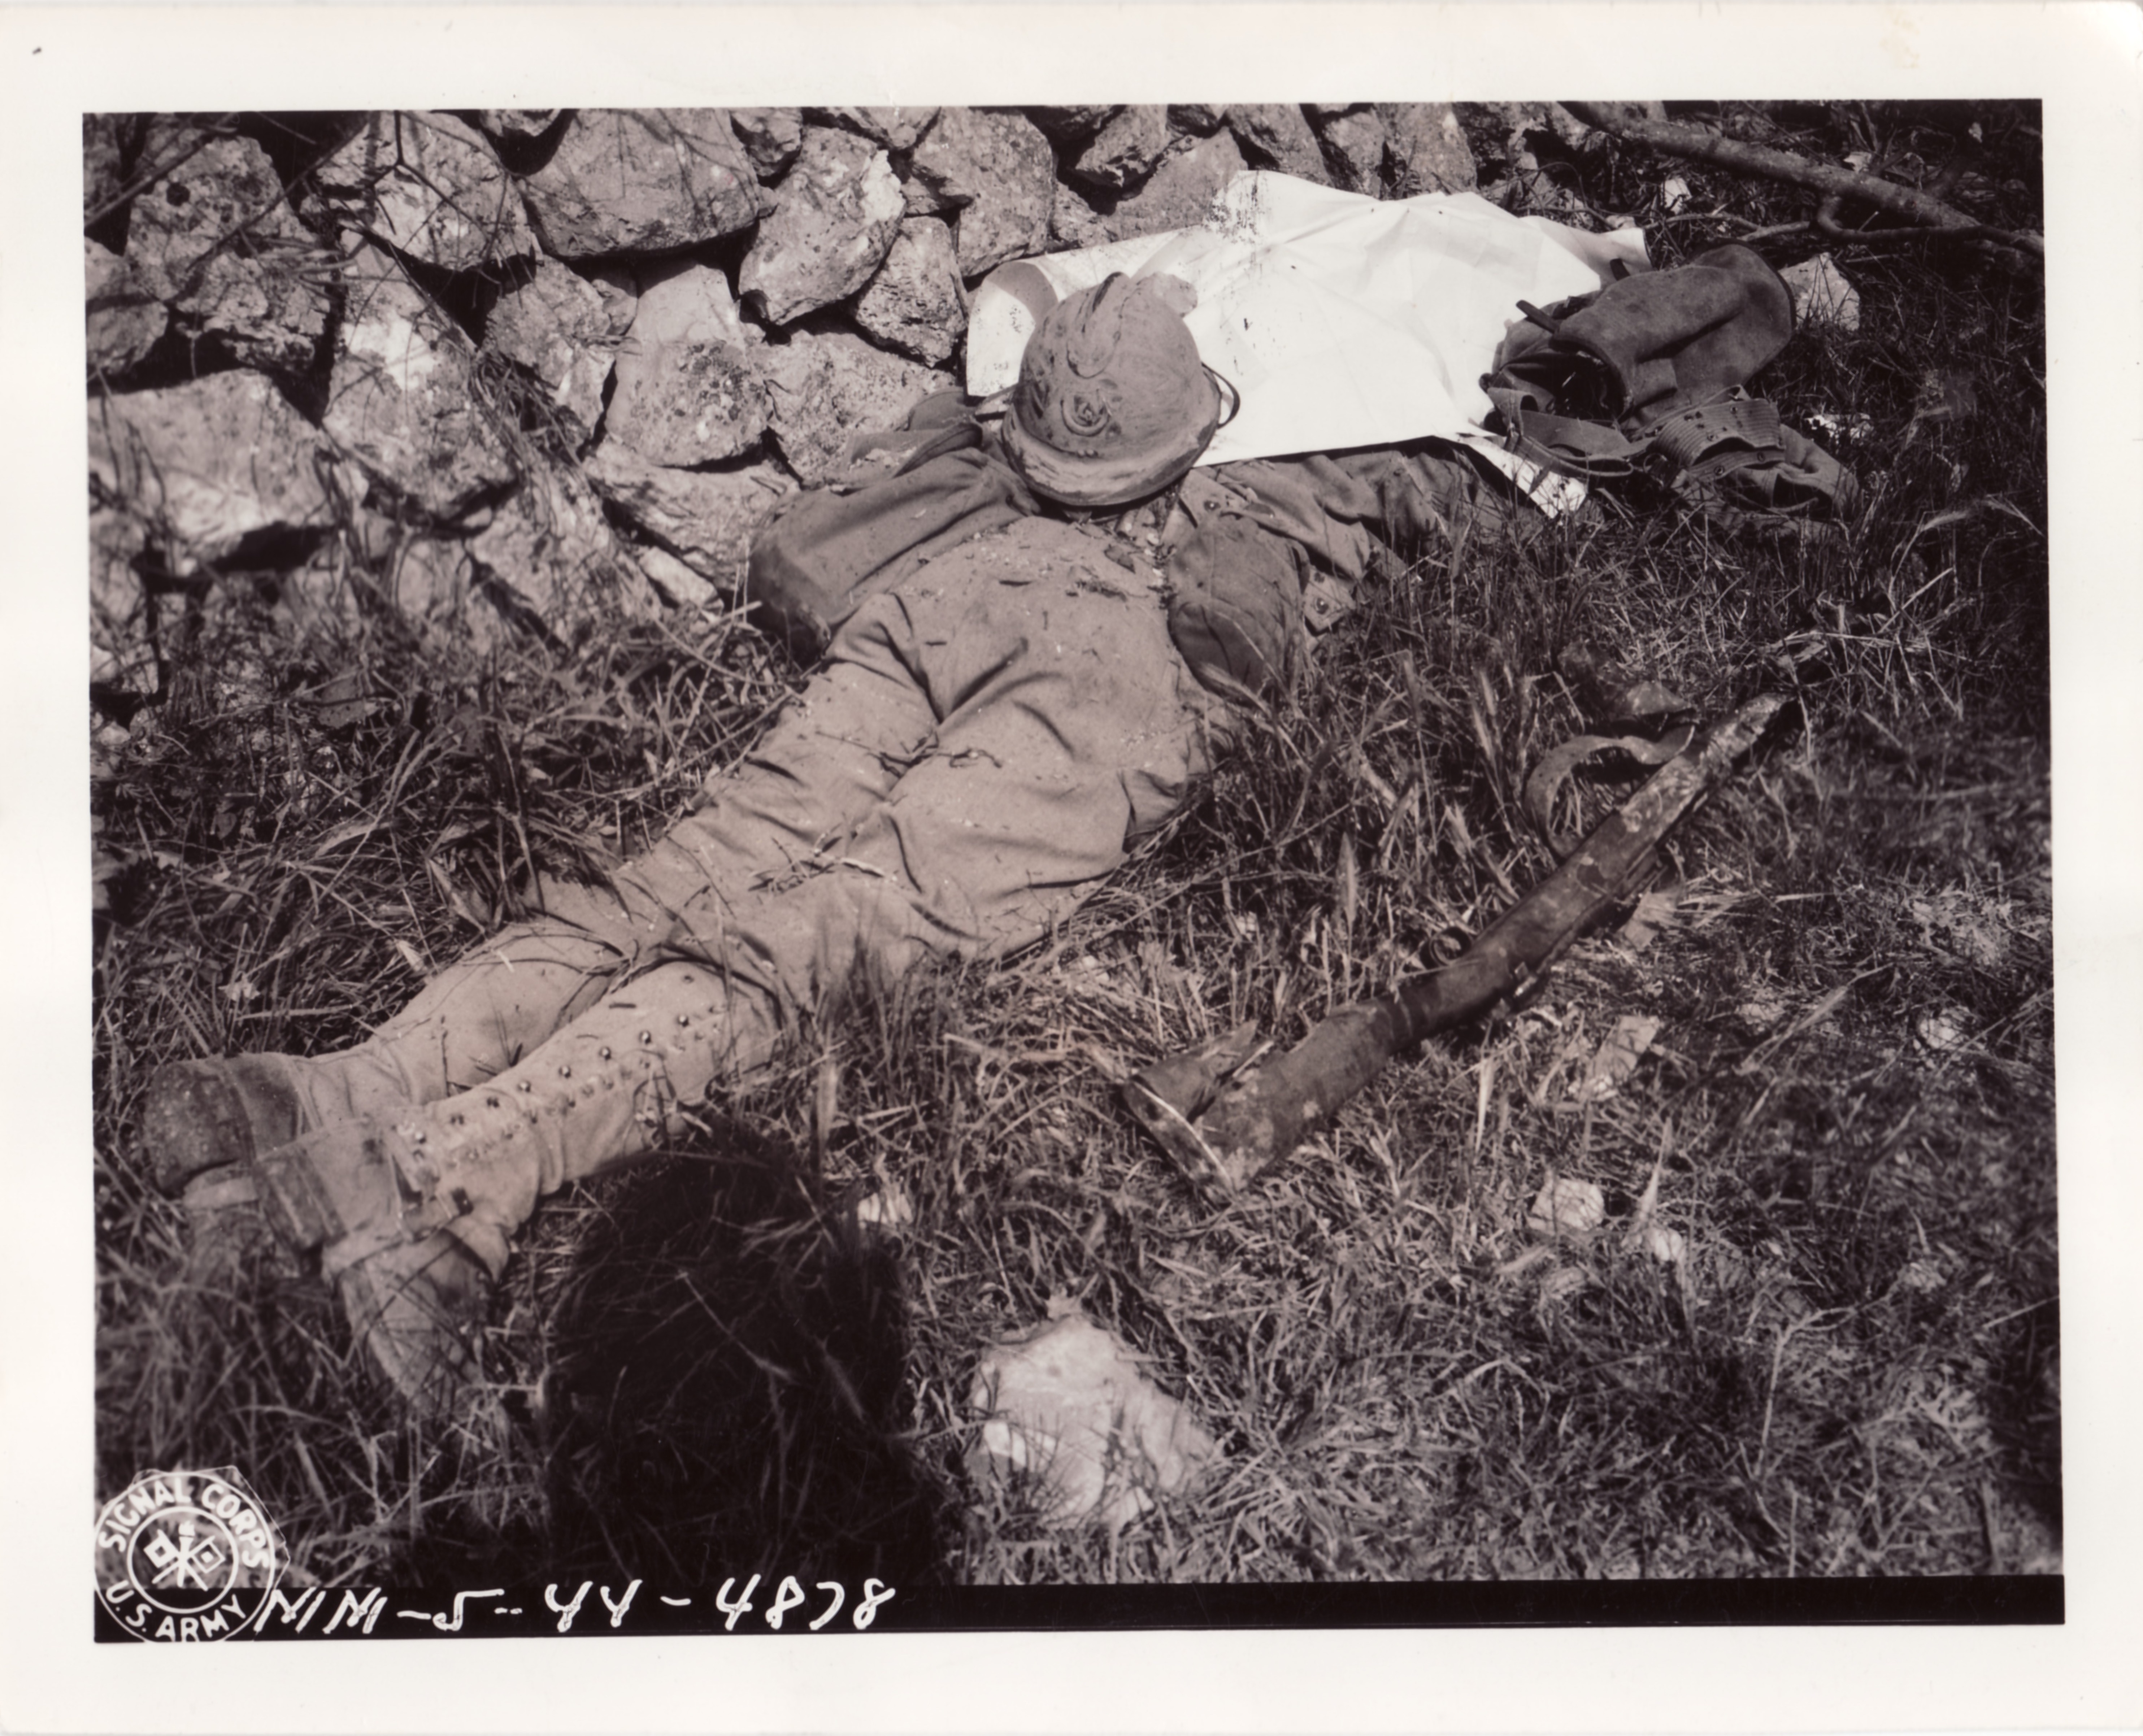 <p class='eng'>13 my 1944 MM-5-44-4878<br />FIFTH ARMY, CASTLEFORTE AREA, ITALY.<br />HIS HEAD COVERED WITH MAPS AD HIS BROKEN RIFLE BESIDE HIM, THIS TUNISIAN INFANTRYMAN LIES DEAD ON THE ROAD TO CASTLEFORTE.<br />PHOTO BY ROONEY<br />163RD SIGNAL PHOTO CO.</p>